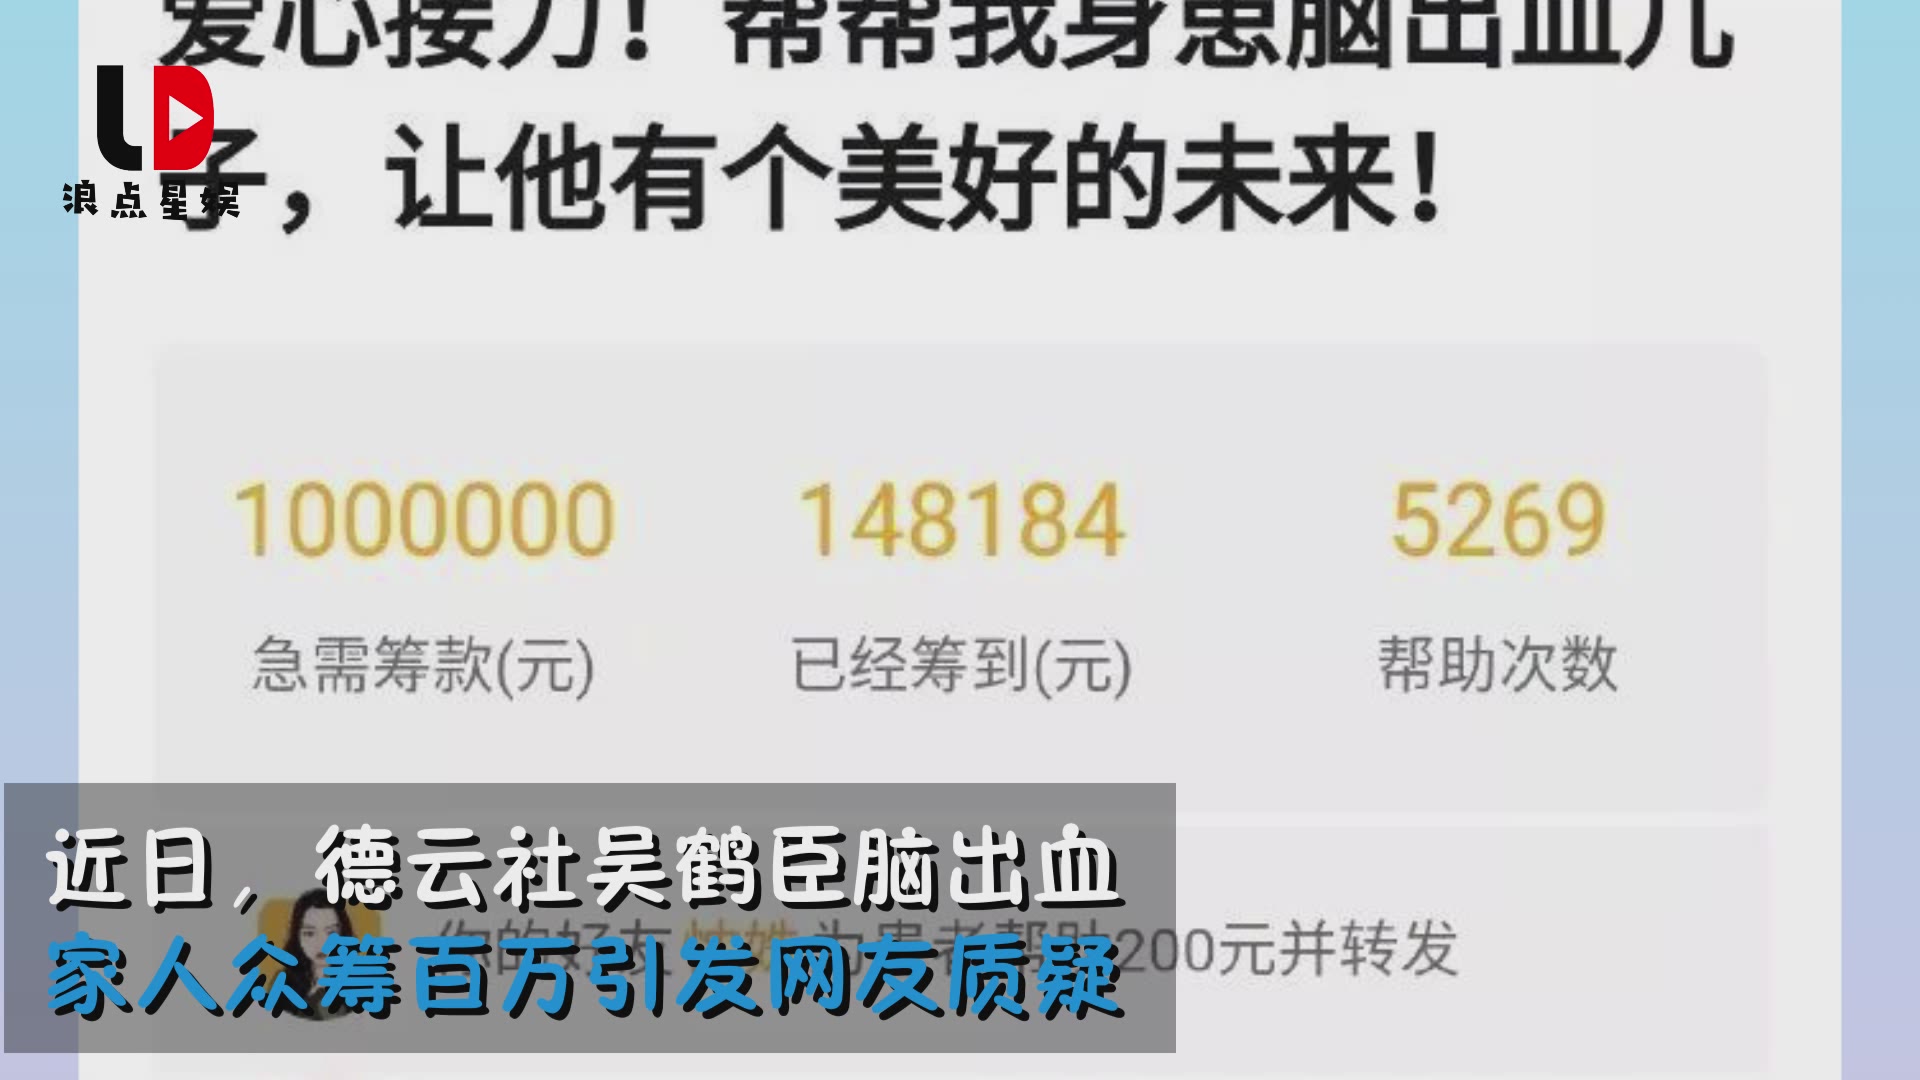 Wu Hechen of Deyun Society raised 150,000 yuan for the time being.